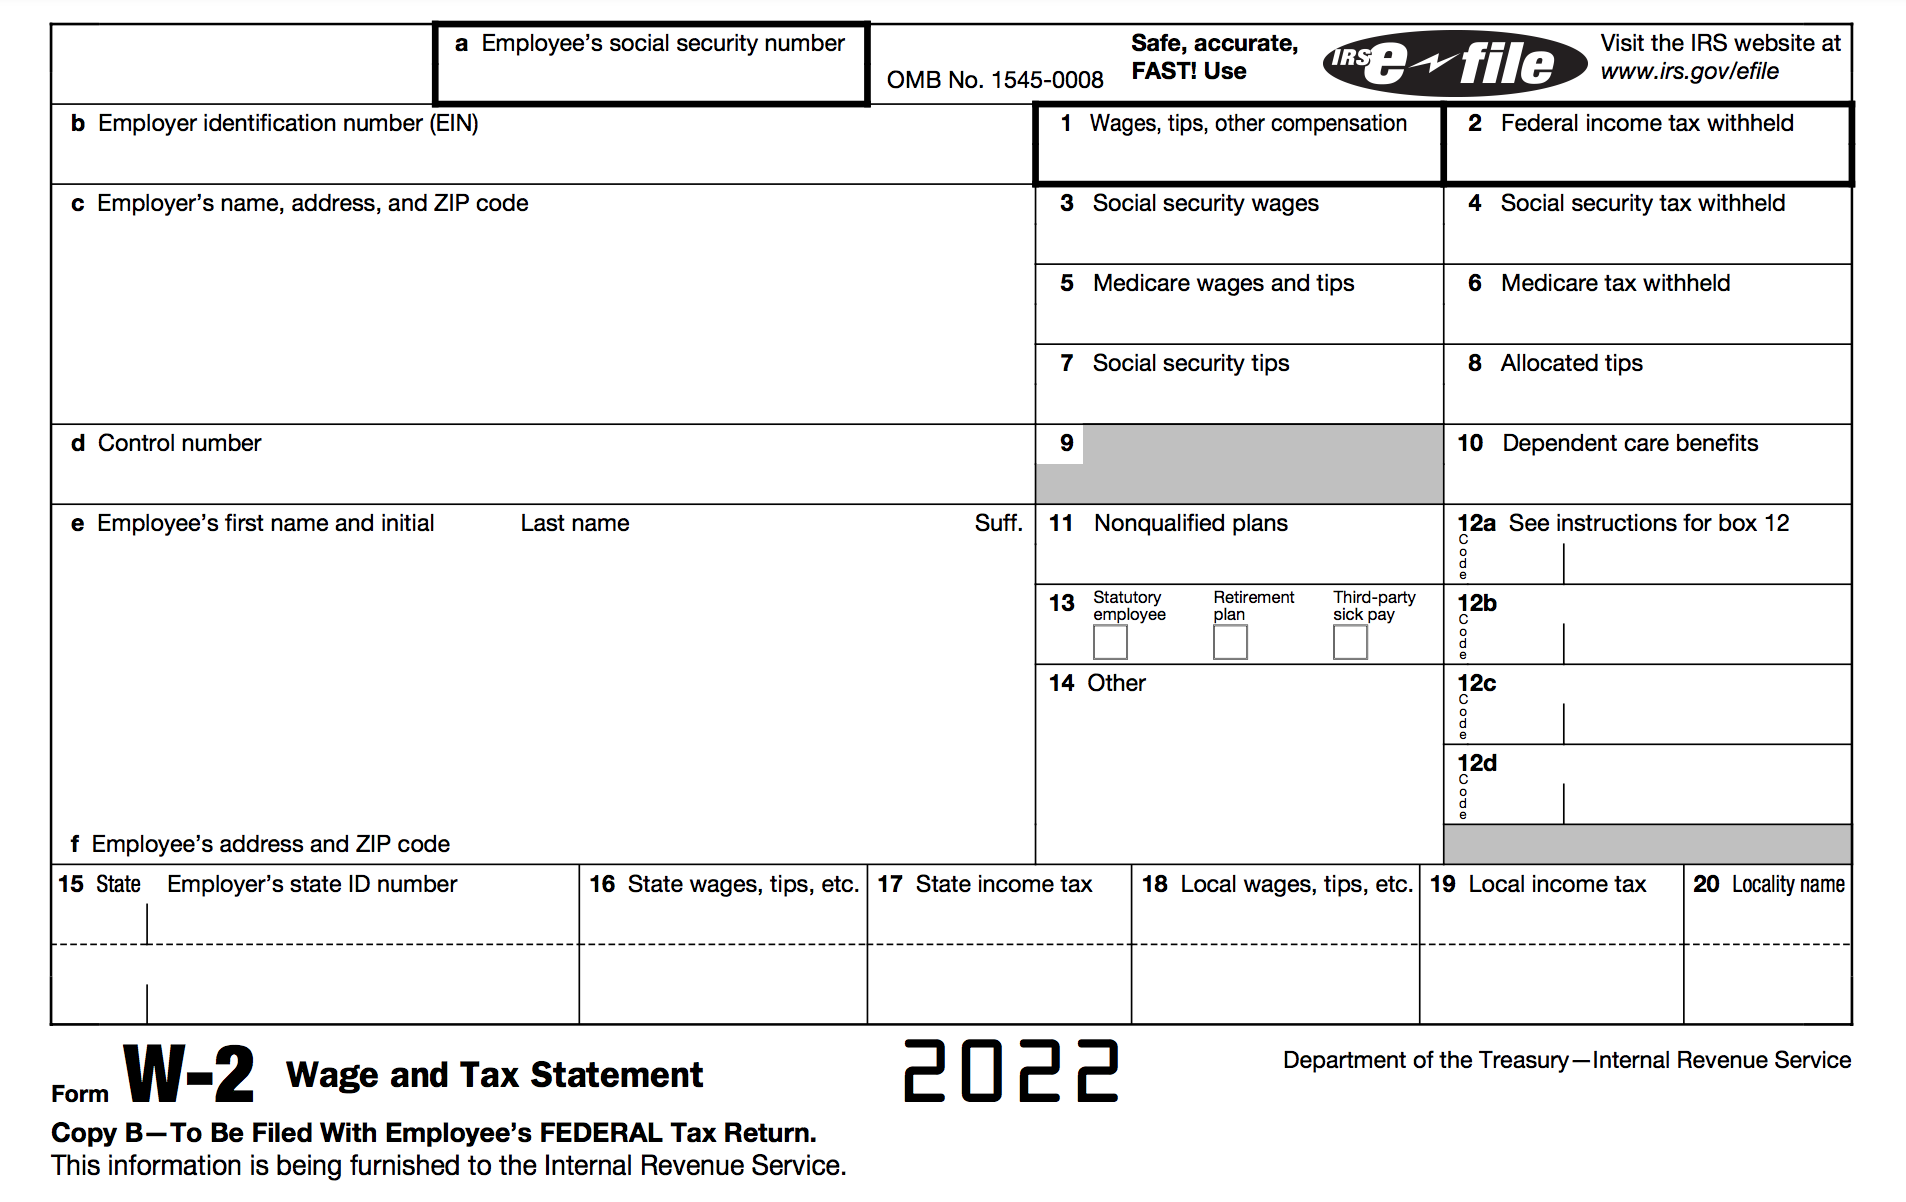 How To Fill Out A W-2 Tax Form | Smartasset with How To Fill Out A W2 Form